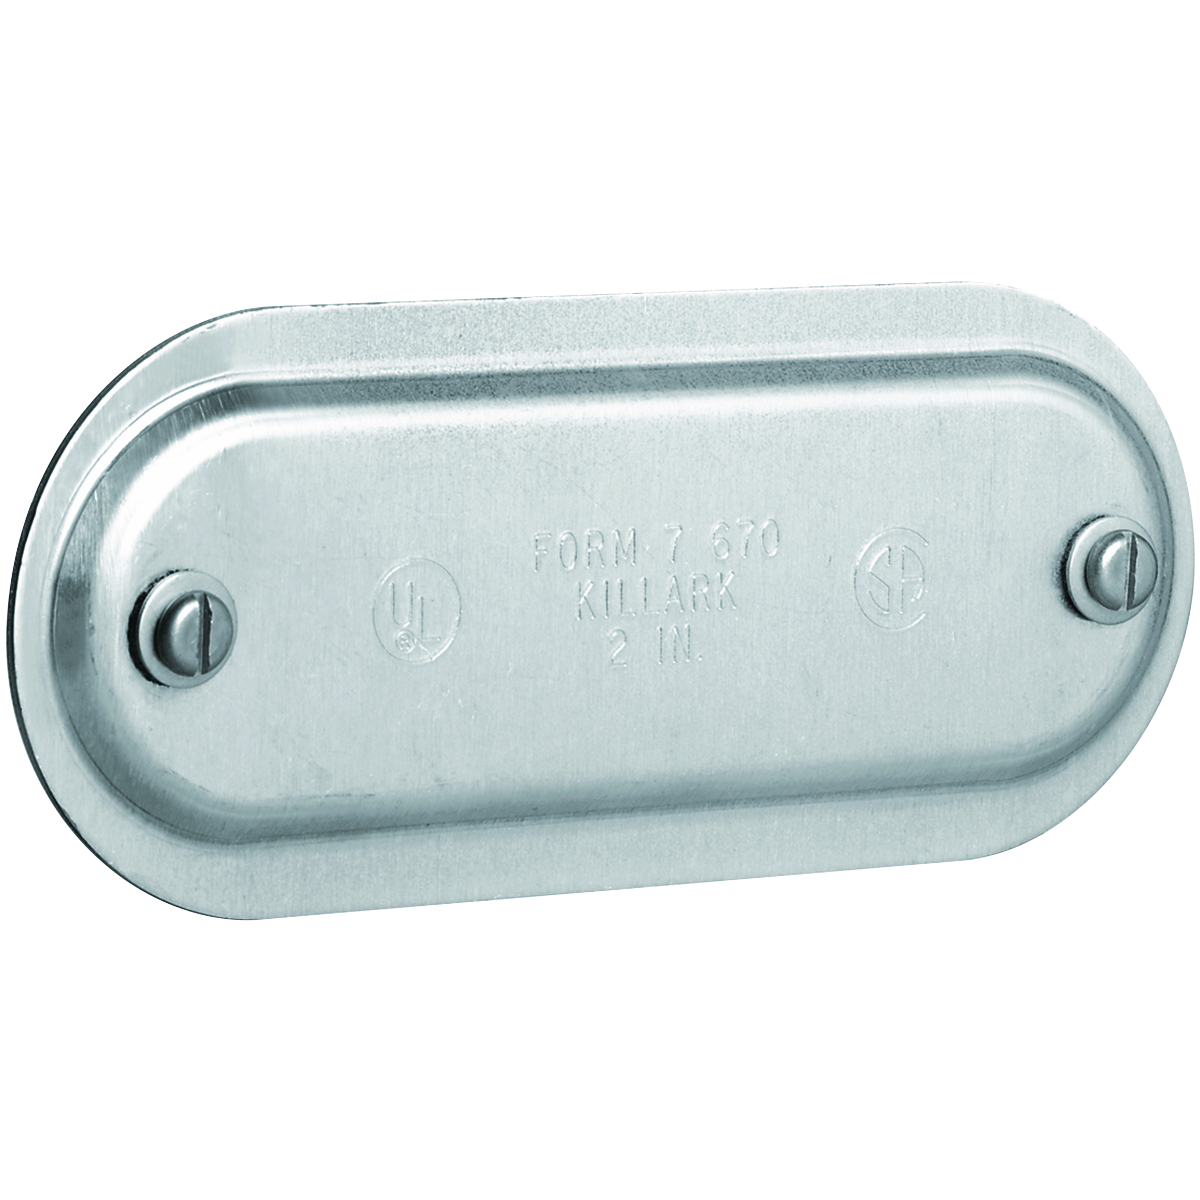 DURALOY 7 SERIES - STAMPED STEEL CONDUIT BODY COVER - HUB SIZE 1/2 INCH